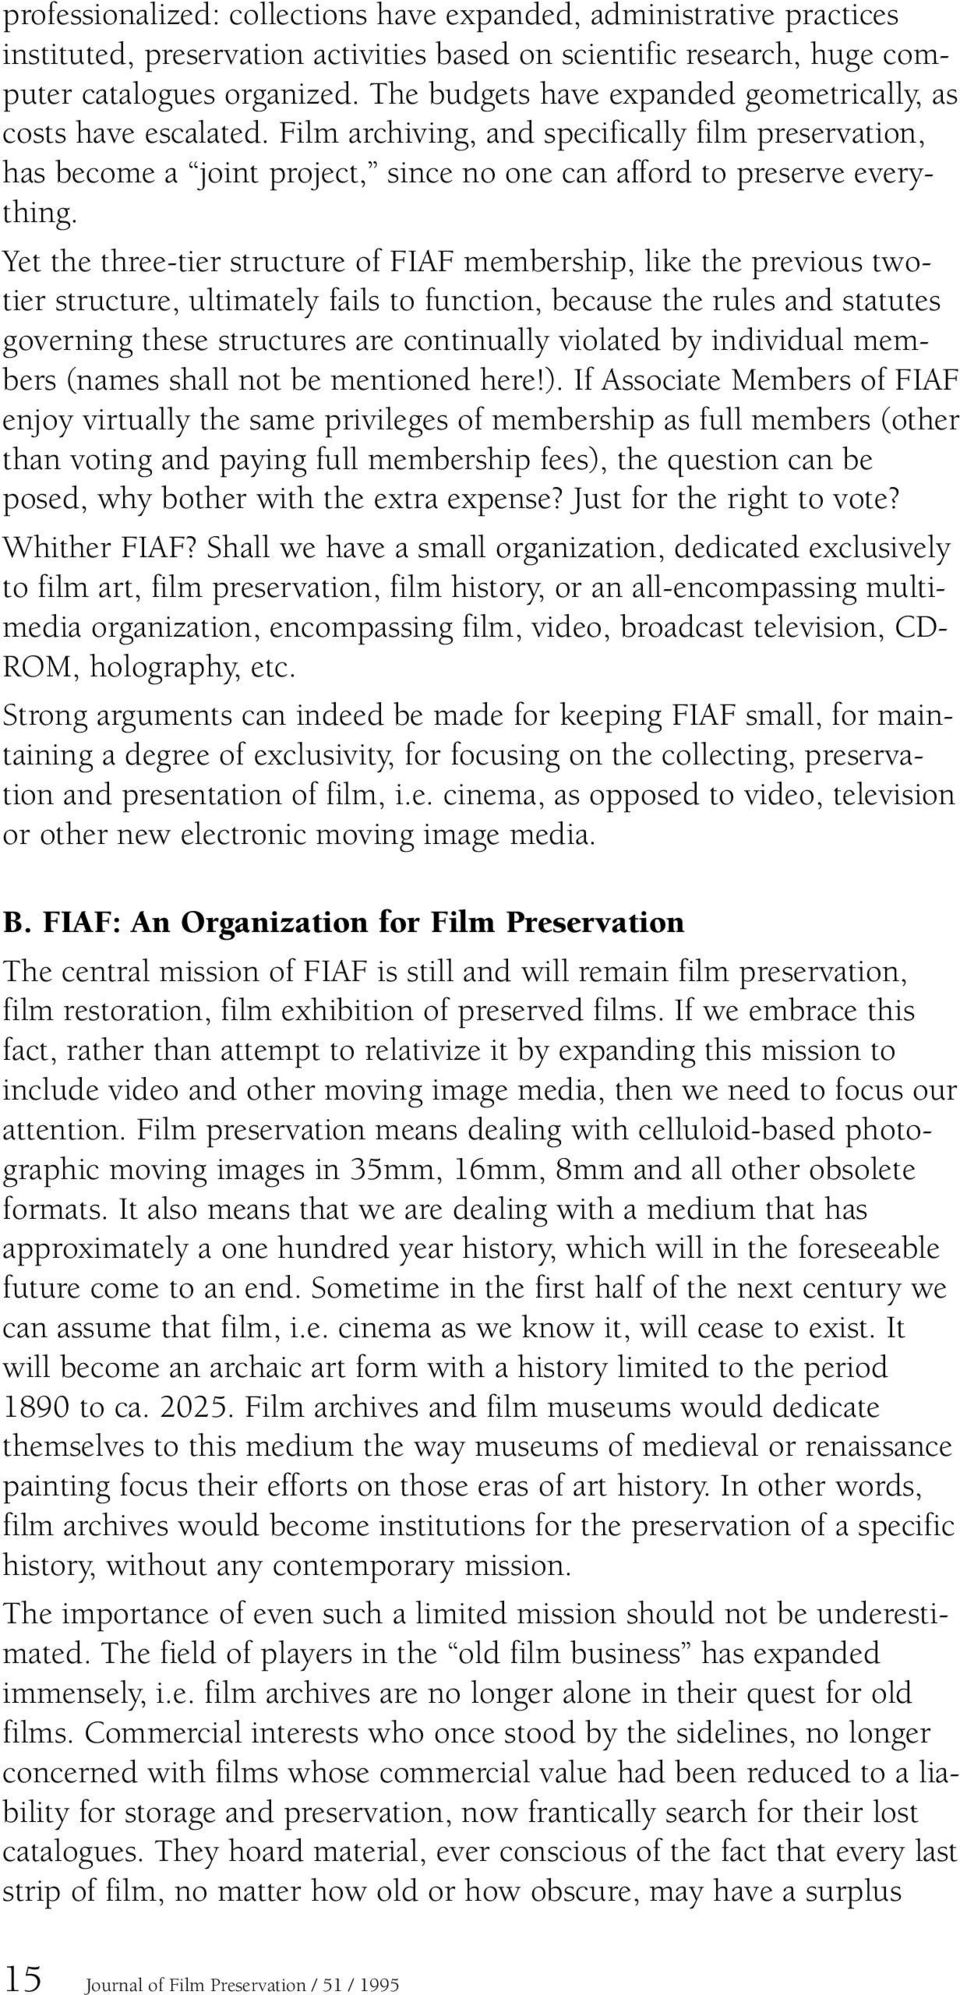 Yet the three-tier structure of FIAF membership, like the previous twotier structure, ultimately fails to function, because the rules and statutes governing these structures are continually violated